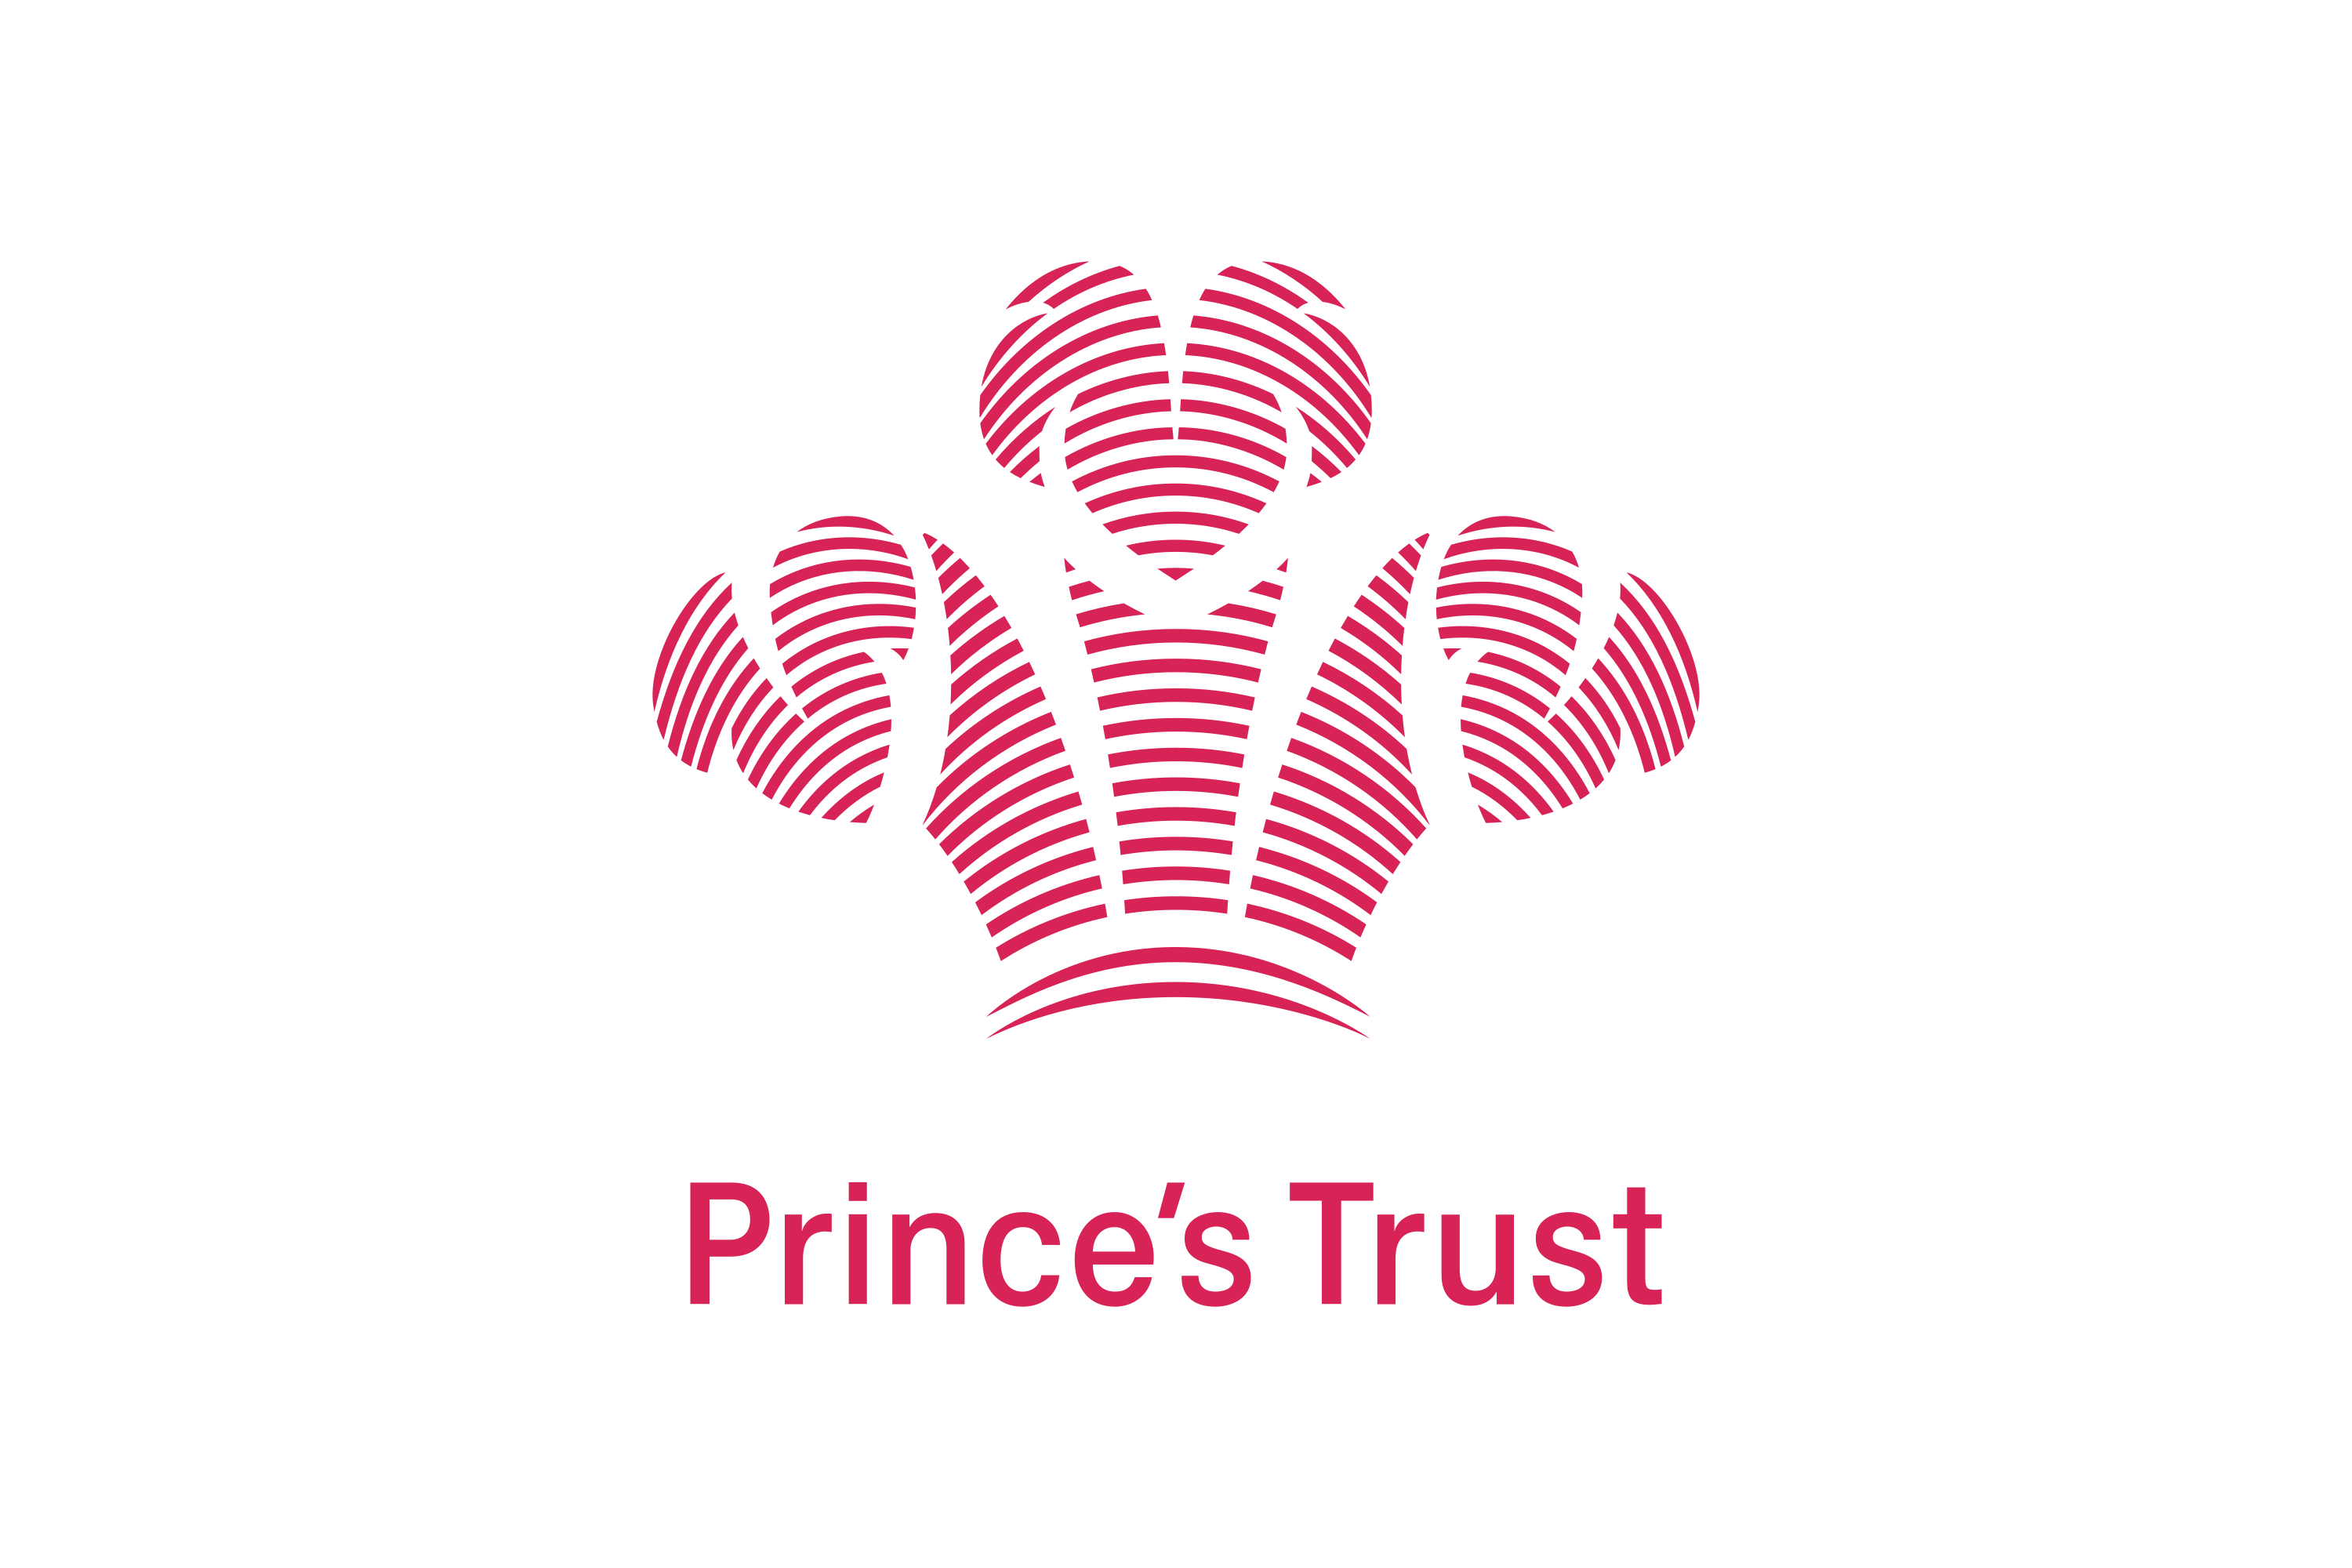 Download The Prince's Trust Logo in SVG Vector or PNG File Format